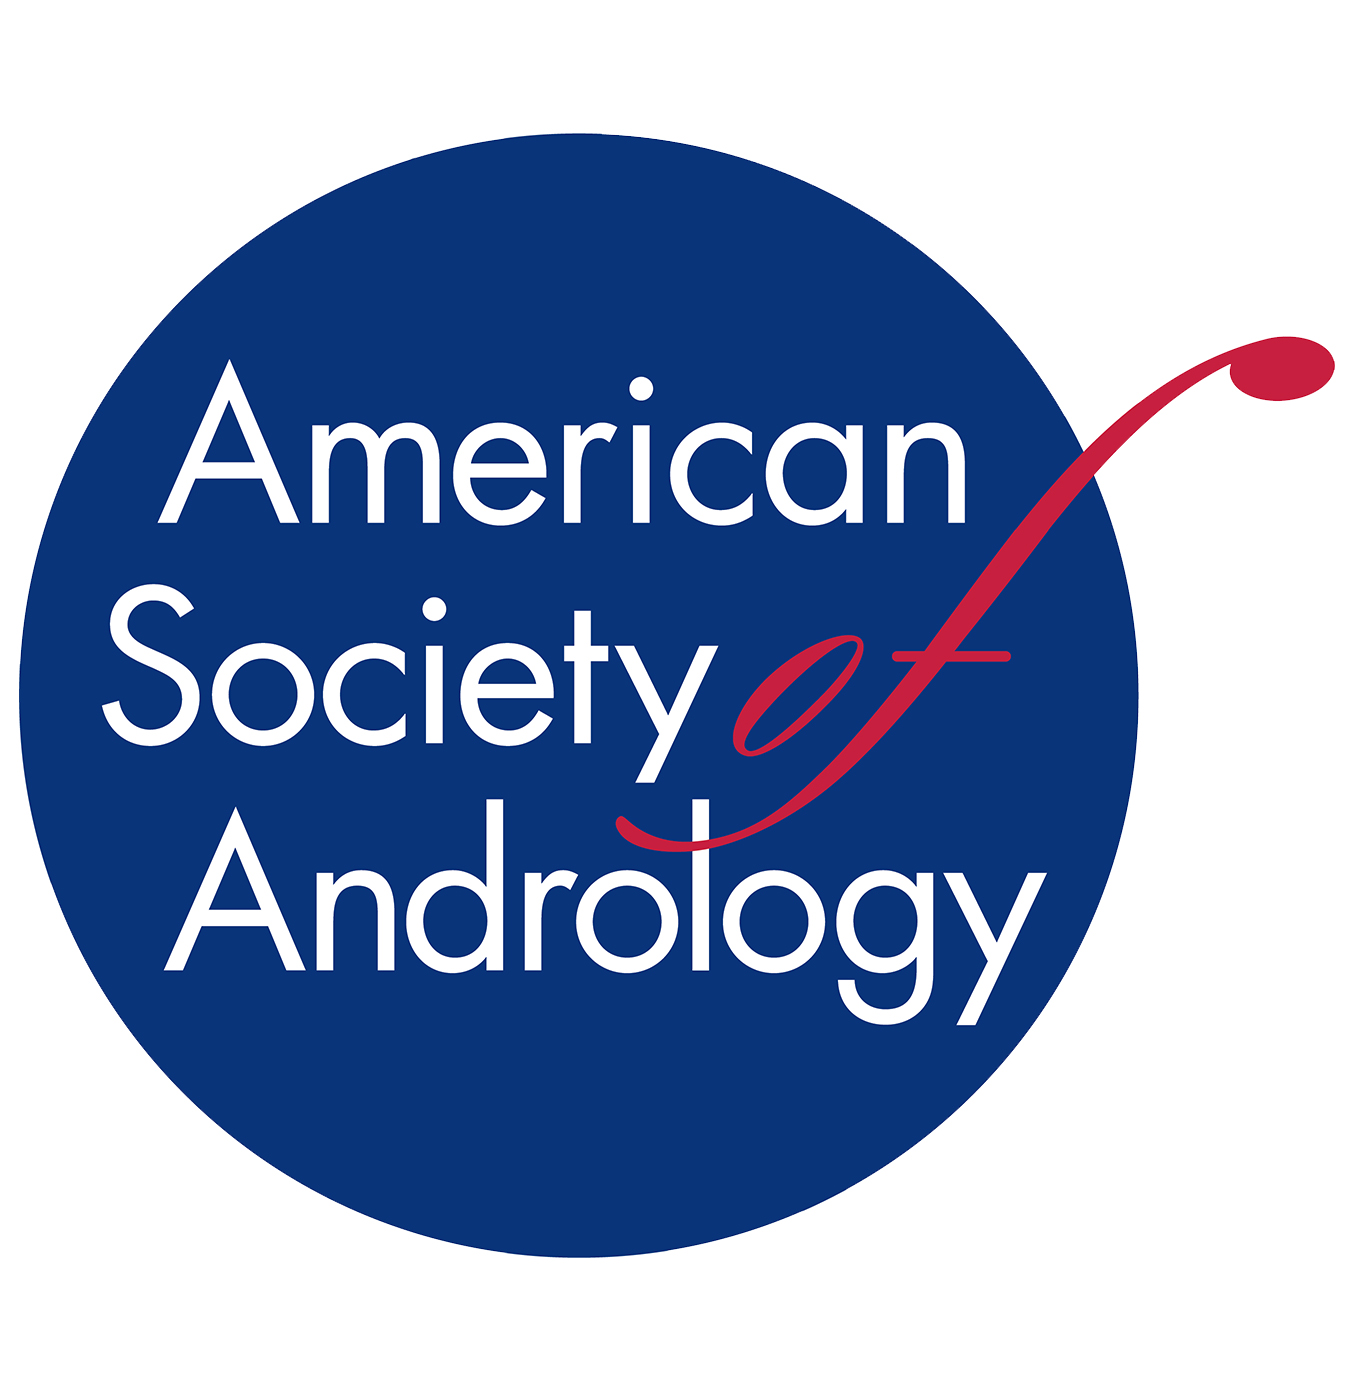 American Society of Andrology